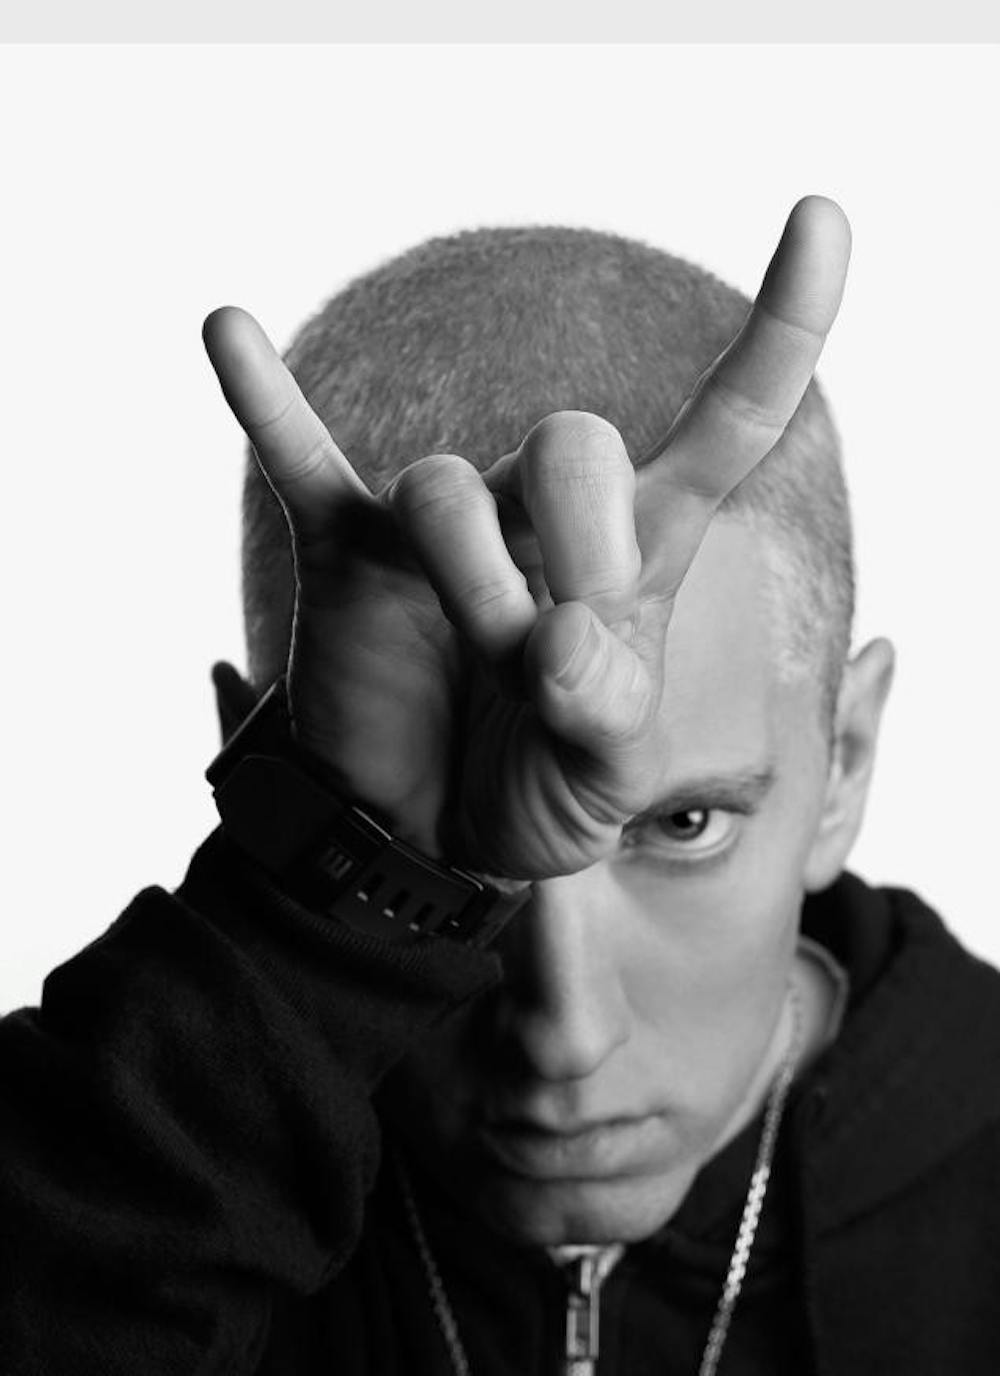 Marshall Mathers releases new LP